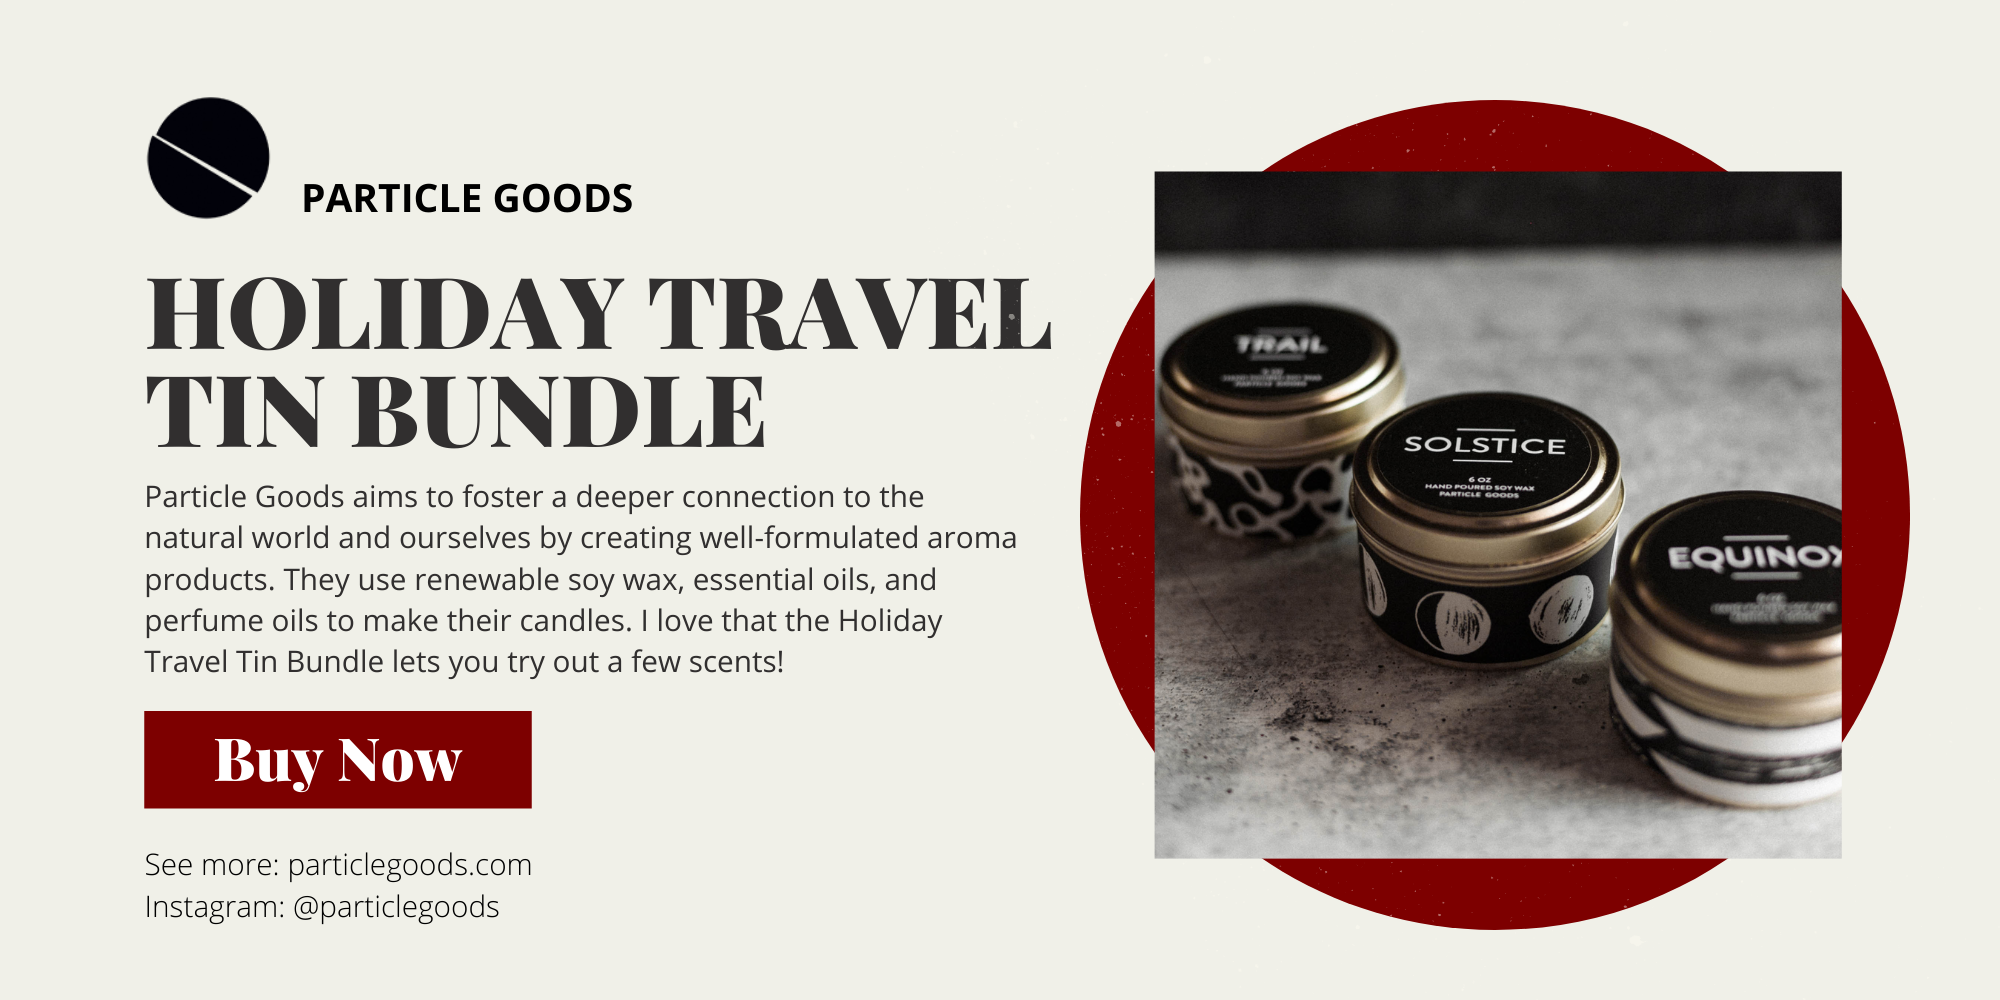 Particle Goods Holiday Travel Tin Bundle